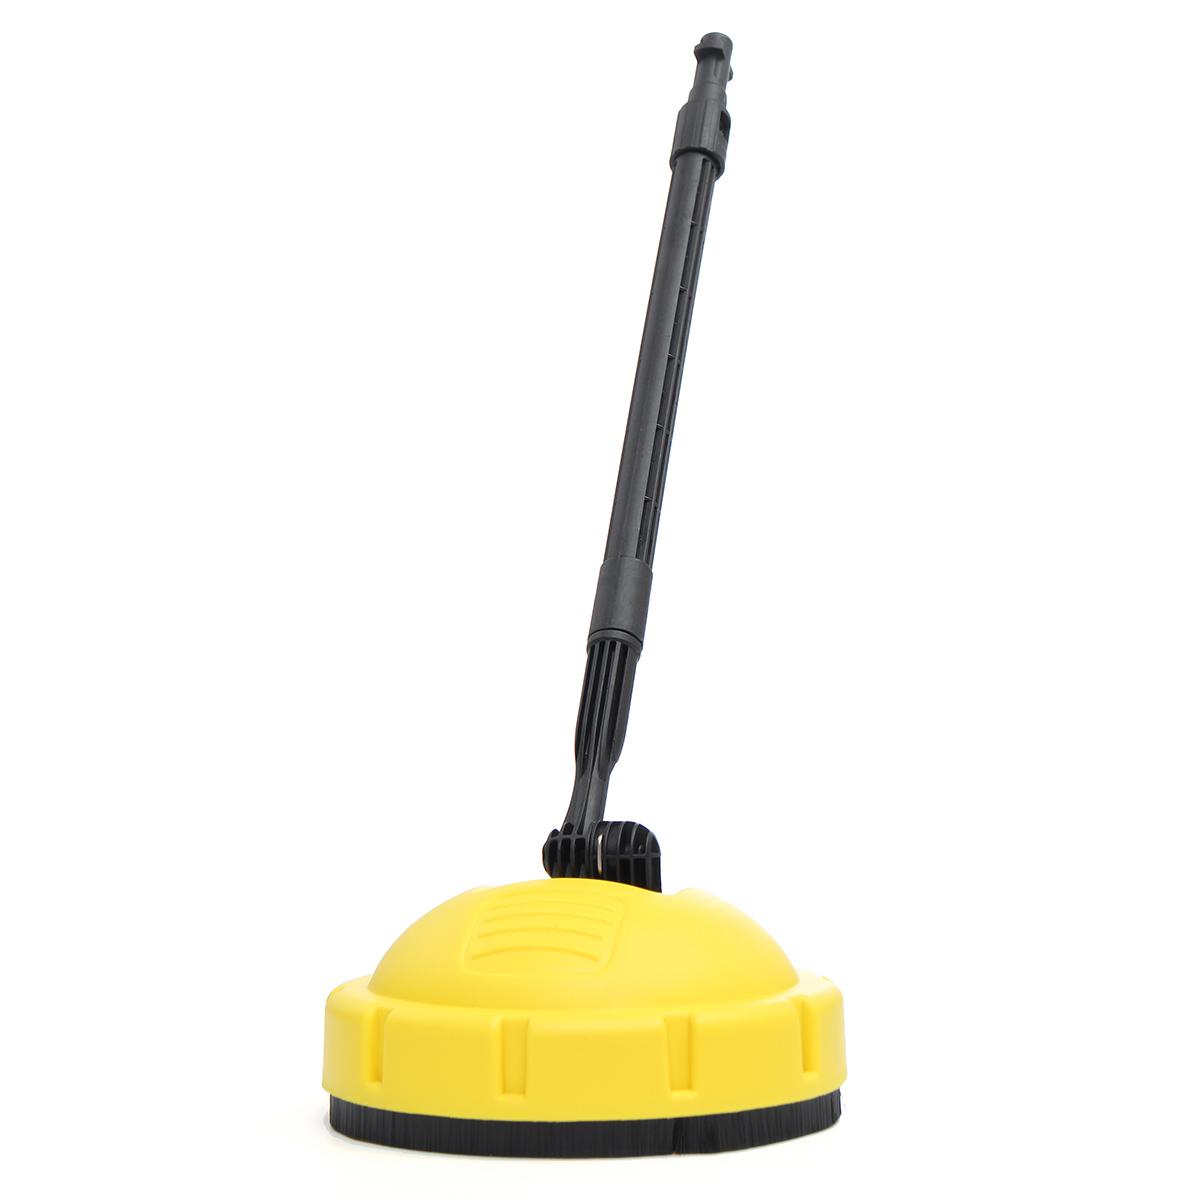 Pressure-Washer-Rotary-Surface-Patio-Cleaner-Floor-Brushing-Washing-Tool-For-Karcher-LAVOR-1330987-4